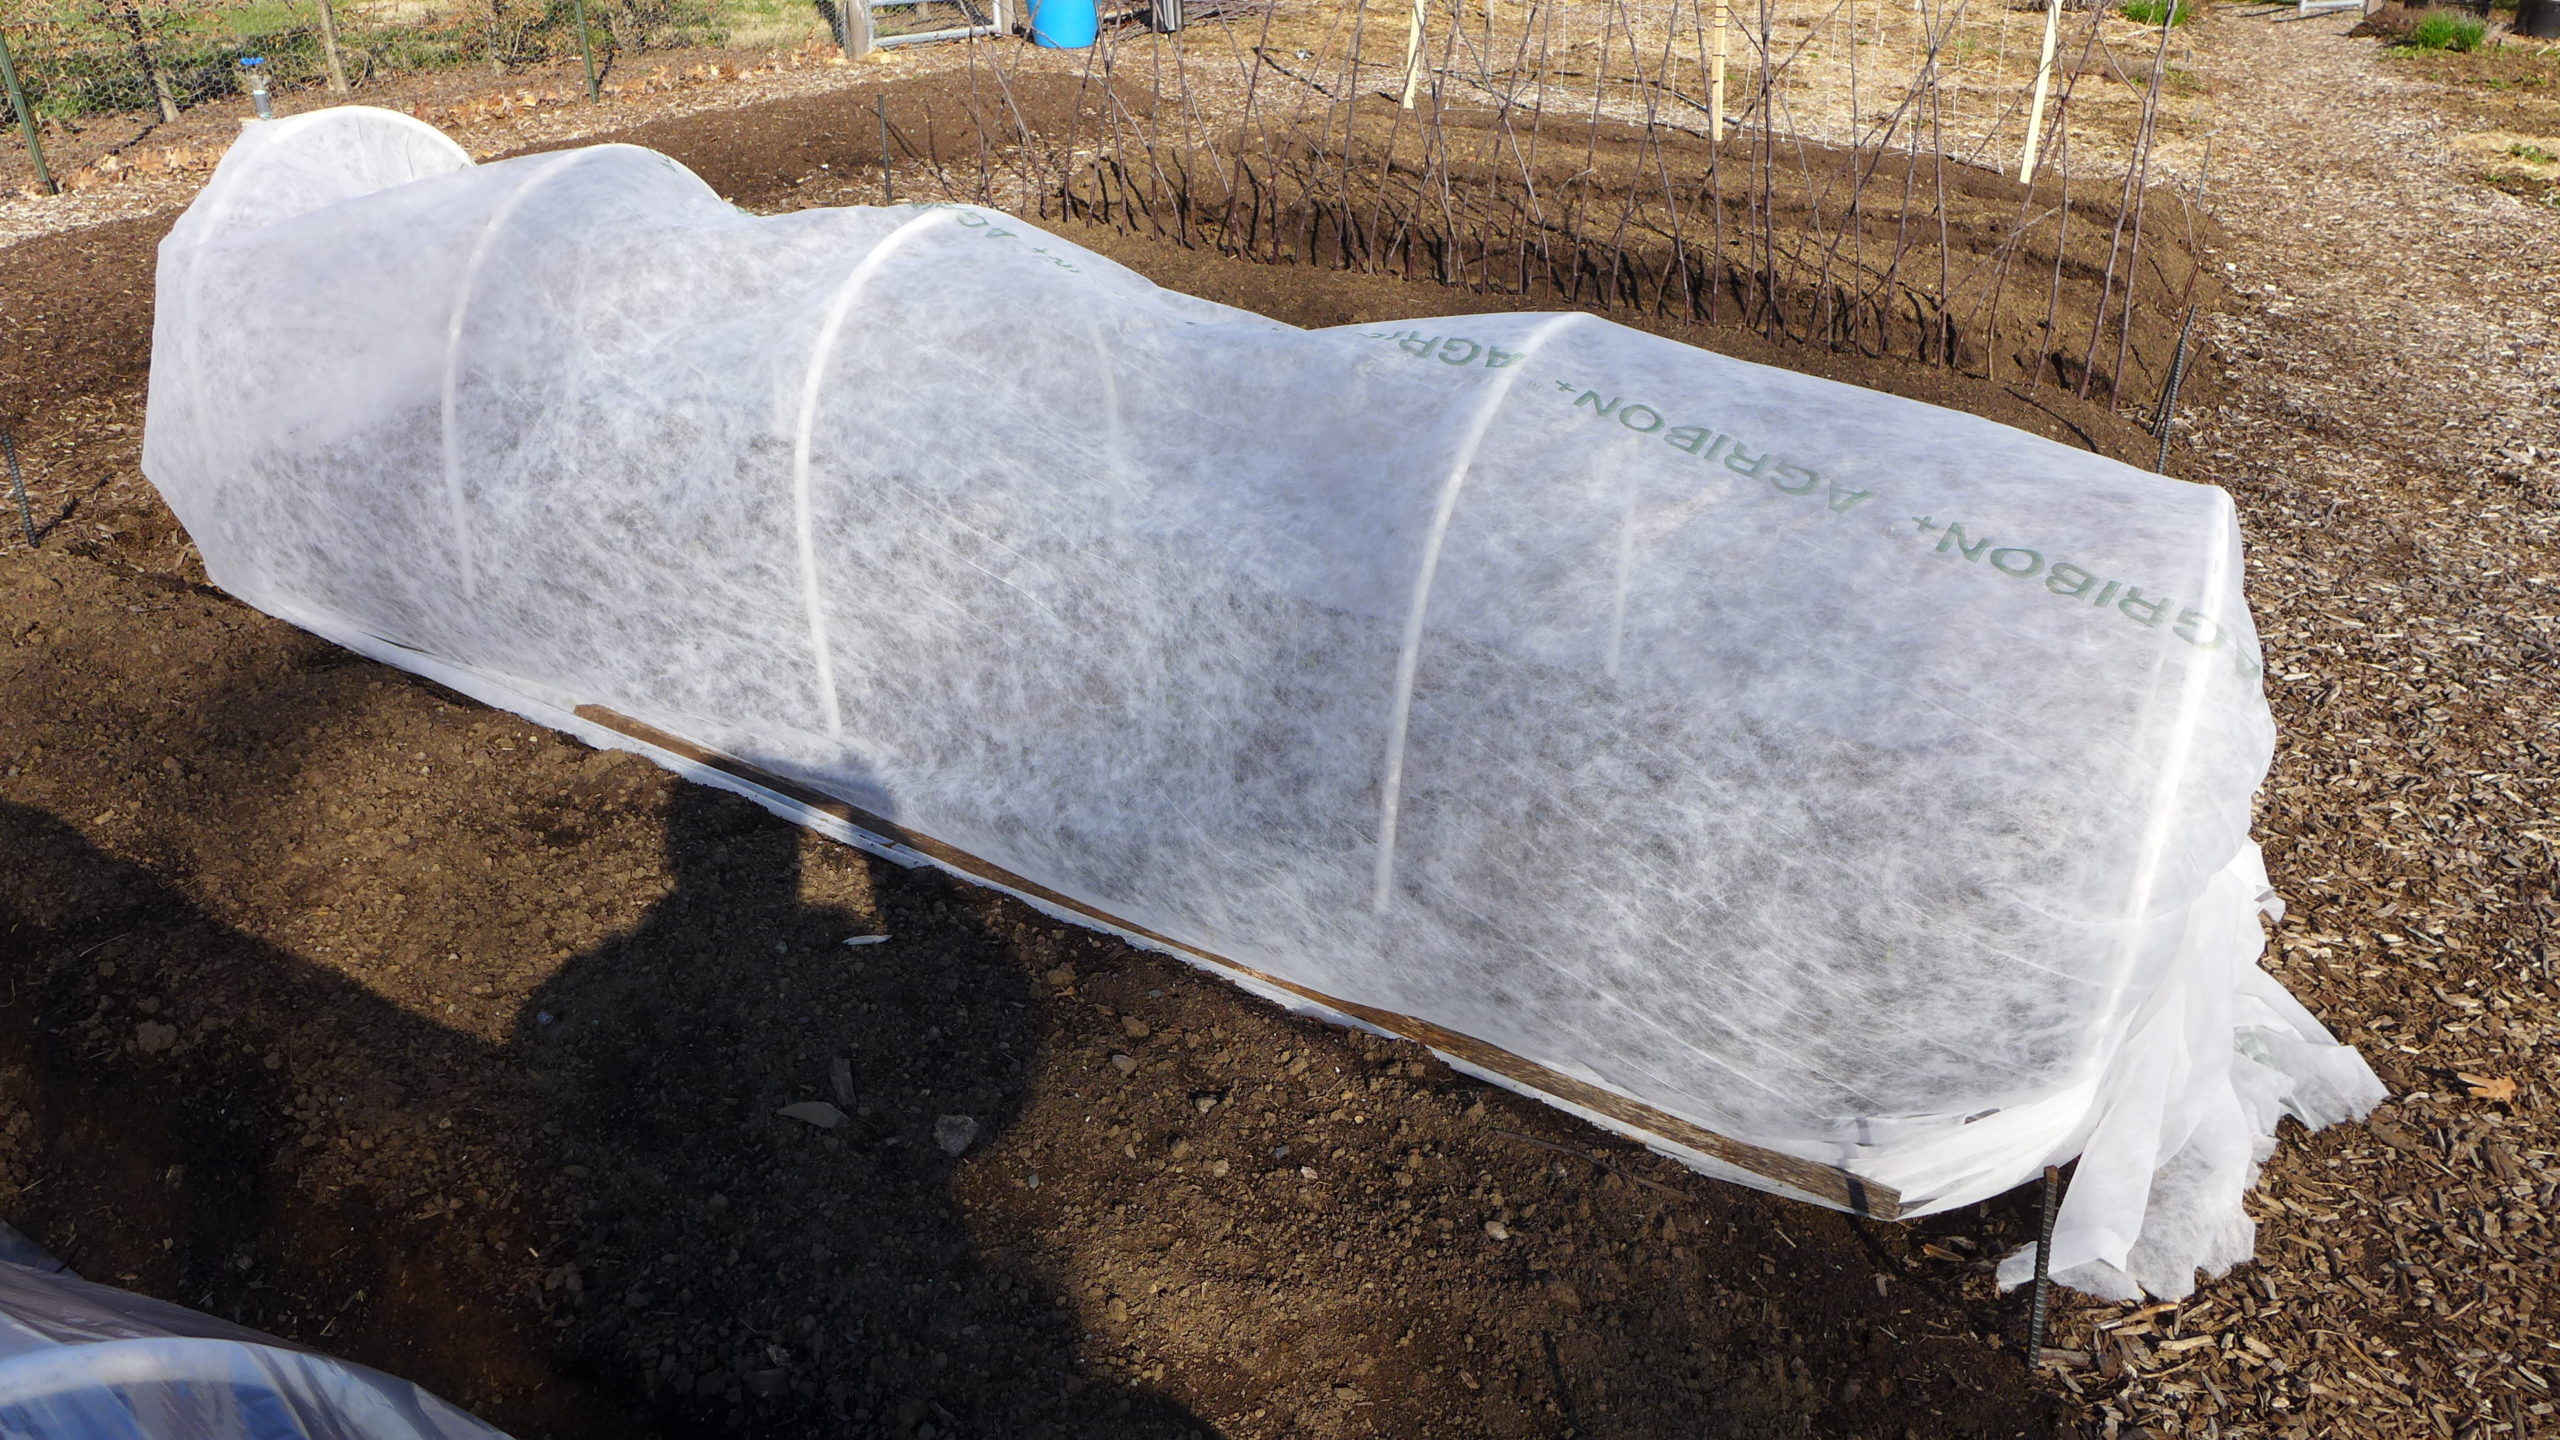 Late in the spring when frost and freezes can still be an issue, low tunnels like this one are covered with a light agricultural fabric that allows some warmth to be retained. The color also reflects some of the sun, keeping the tunnel cool on warm spring days. The ends can still be opened if additional venting is needed.